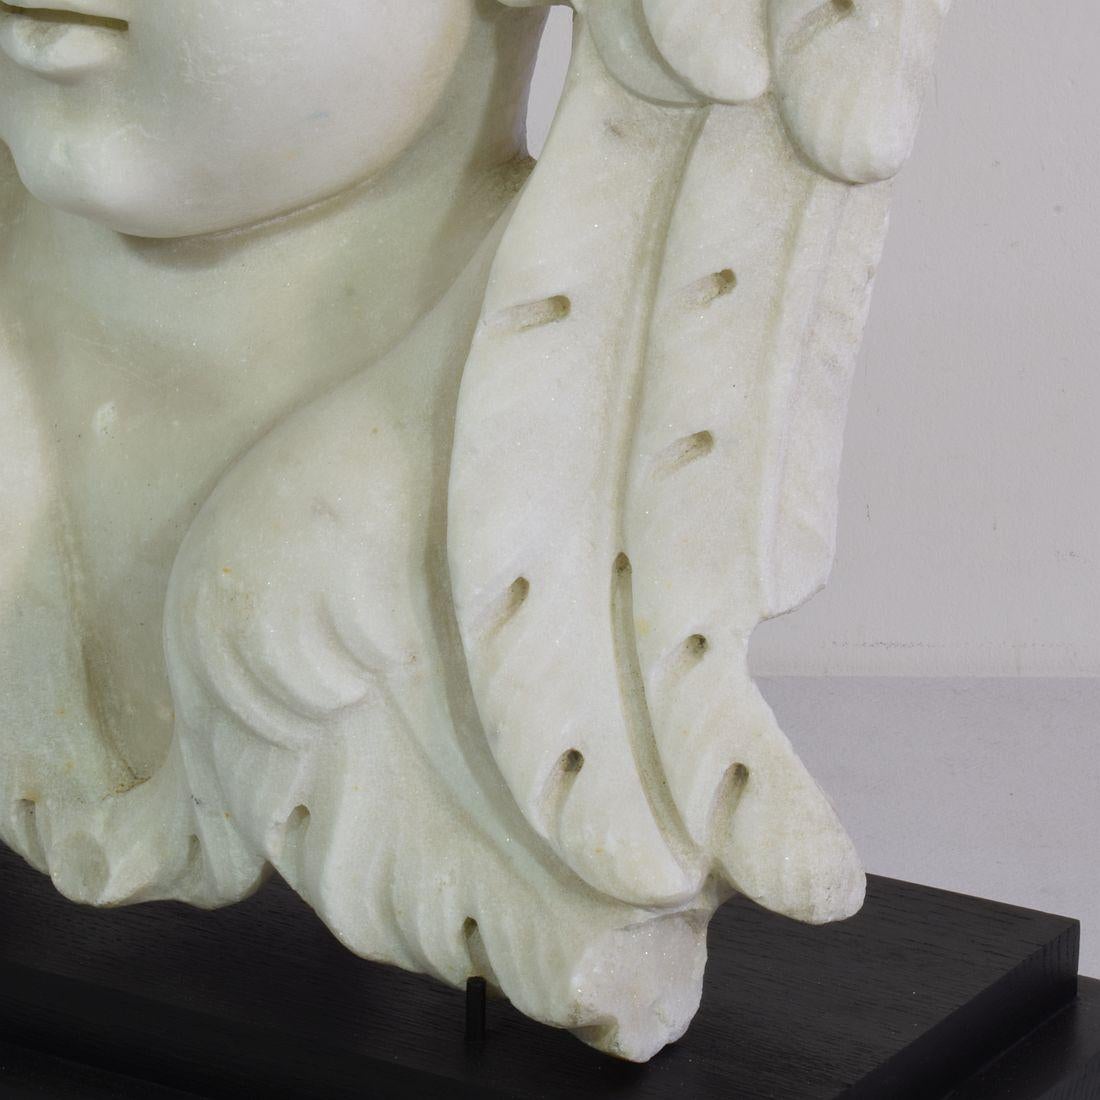 Italian, 17th / 18th Century Carved White Marble Winged Angel Head Ornament For Sale 8